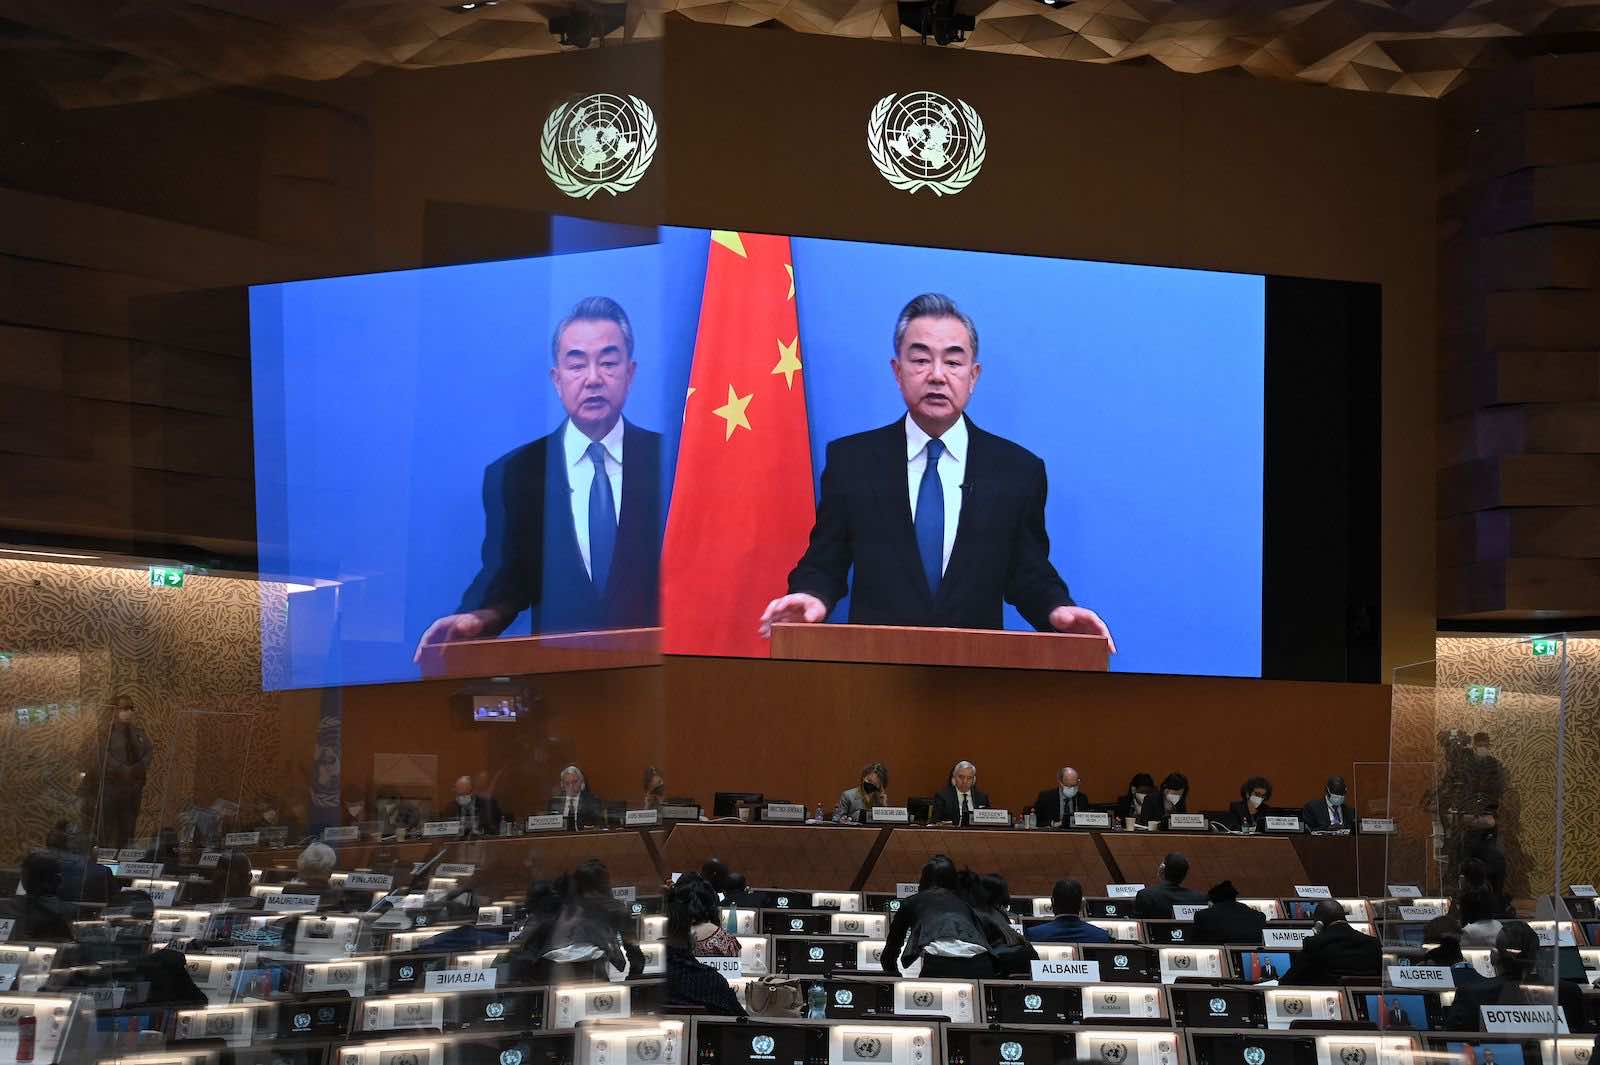 China’s Foreign minister Wang Yi delivers a remote speech at the opening session of the UN Human Rights Council following the Russian invasion in Ukraine, in Geneva, 28 February (Fabrice Coffrini/AFP via Getty Images)